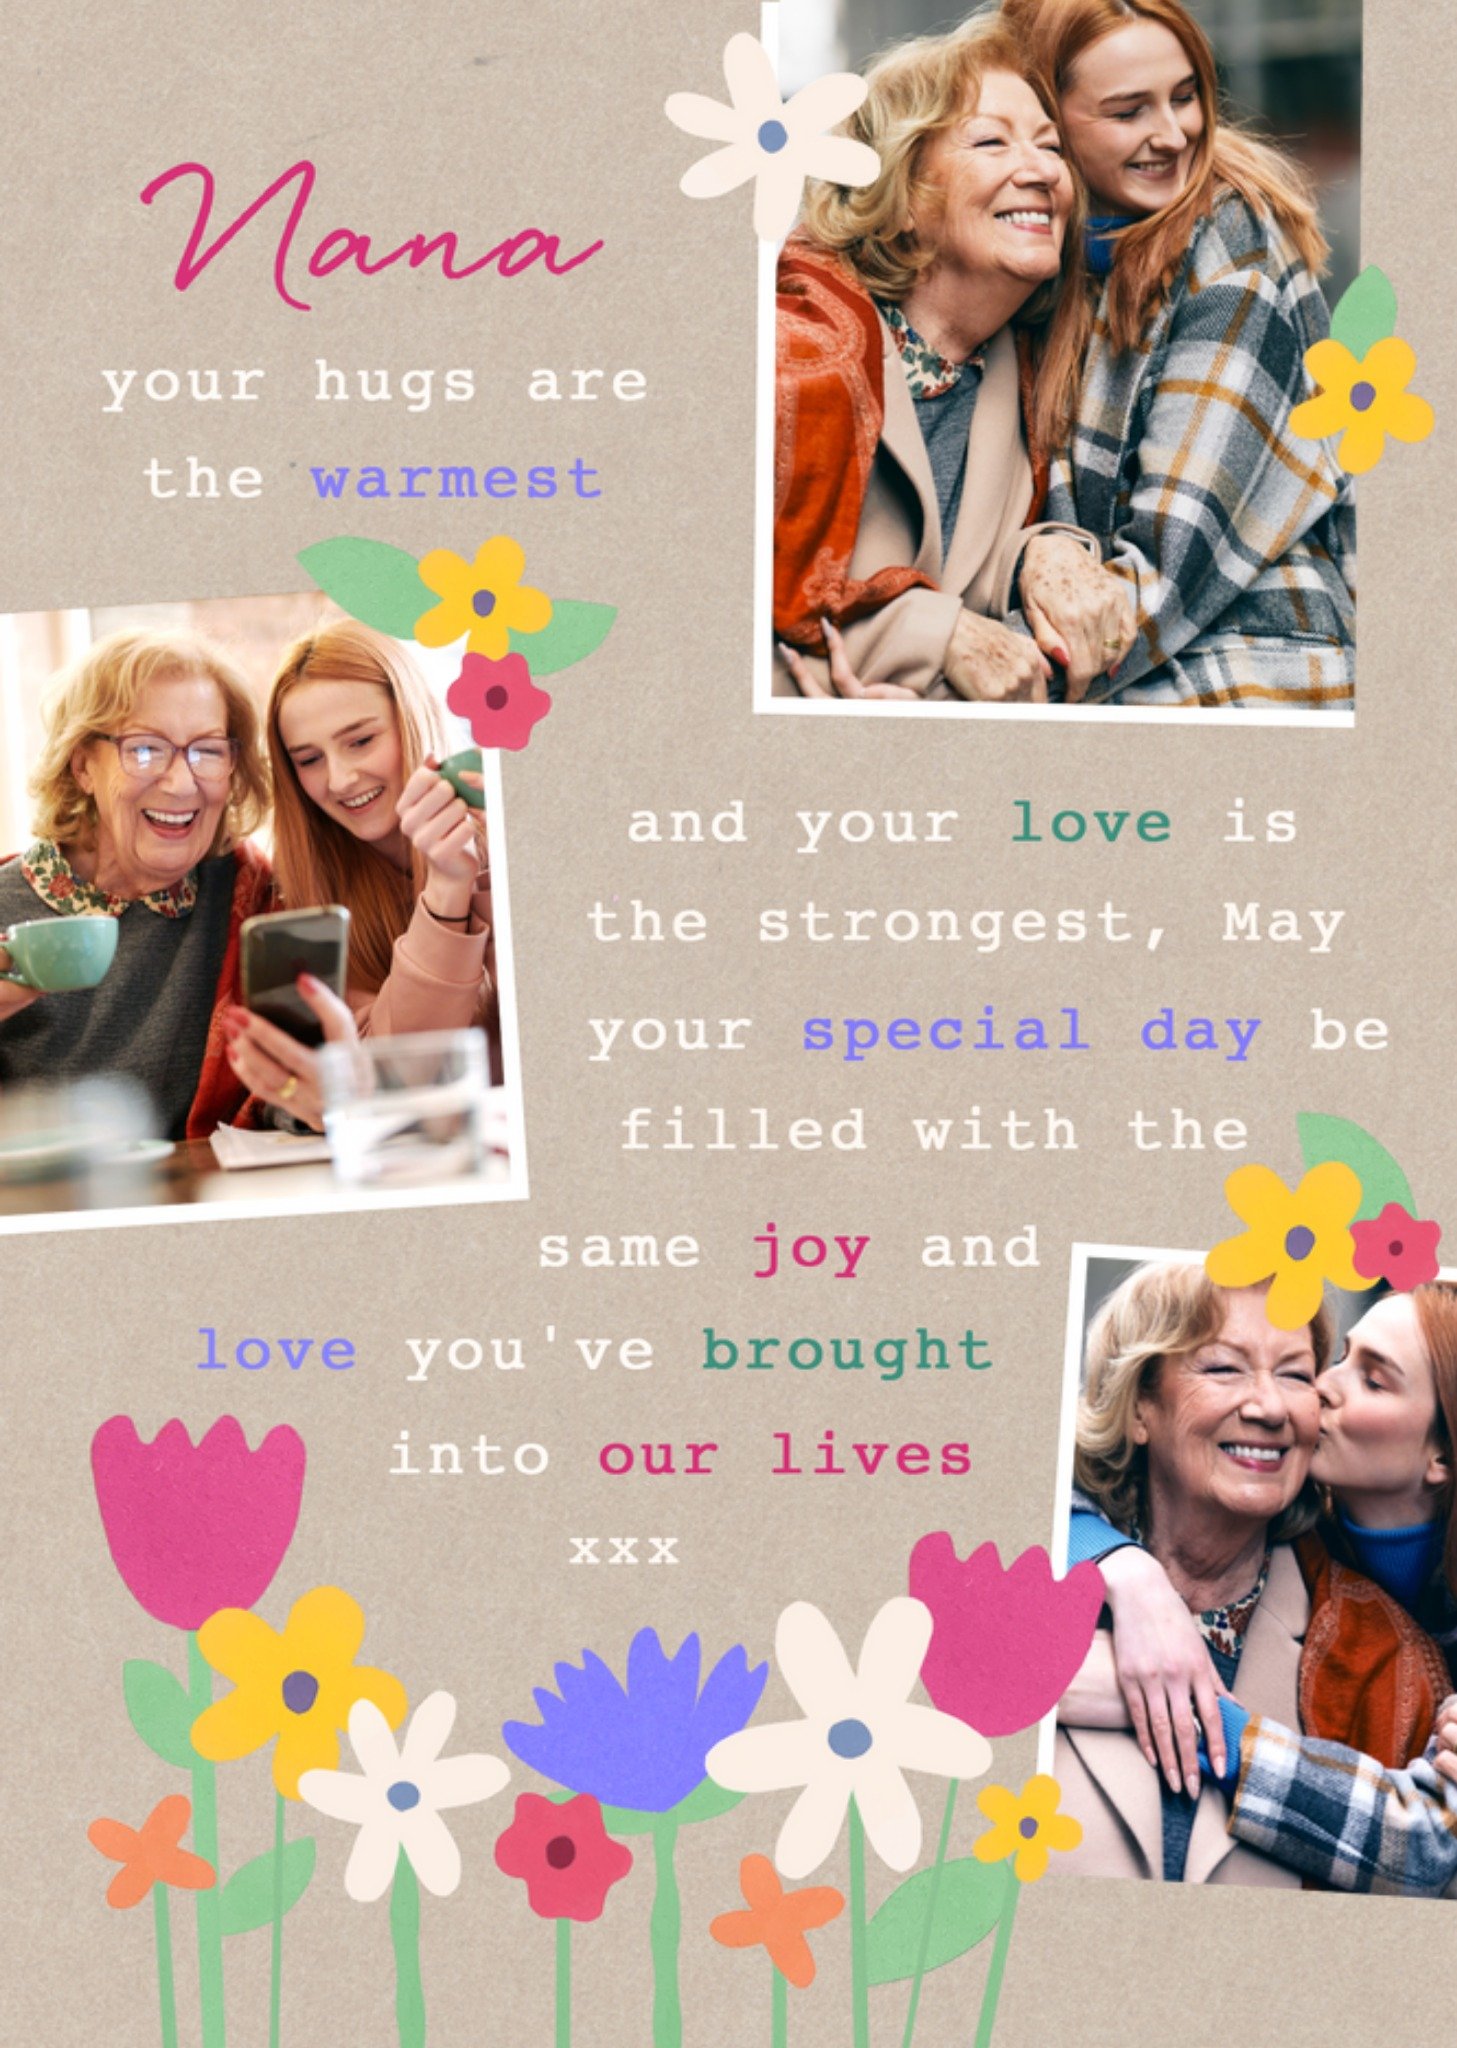 Moonpig Pretty Lovely Nana Your Hugs Are The Warmest Floral Illustration Photo Upload Mother's Day C